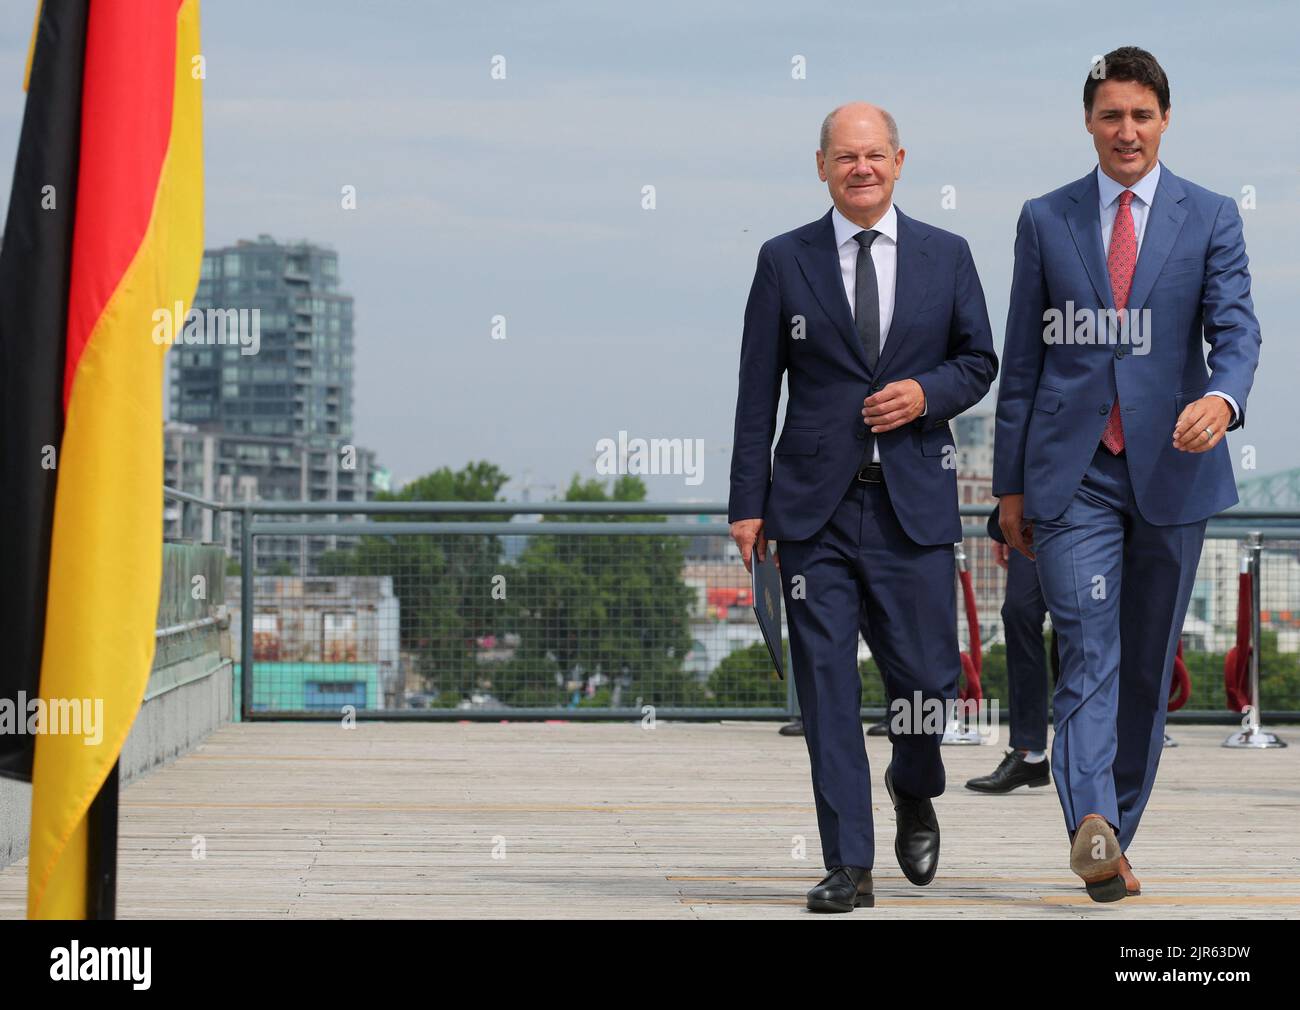 Germany's Chancellor Olaf Scholz and Canada's Prime Minister Justin Trudeau attend to speak to the media outside the Montreal Science Centre, in Montreal, Quebec, Canada August 22, 2022. REUTERS/Christinne Muschi Stock Photo